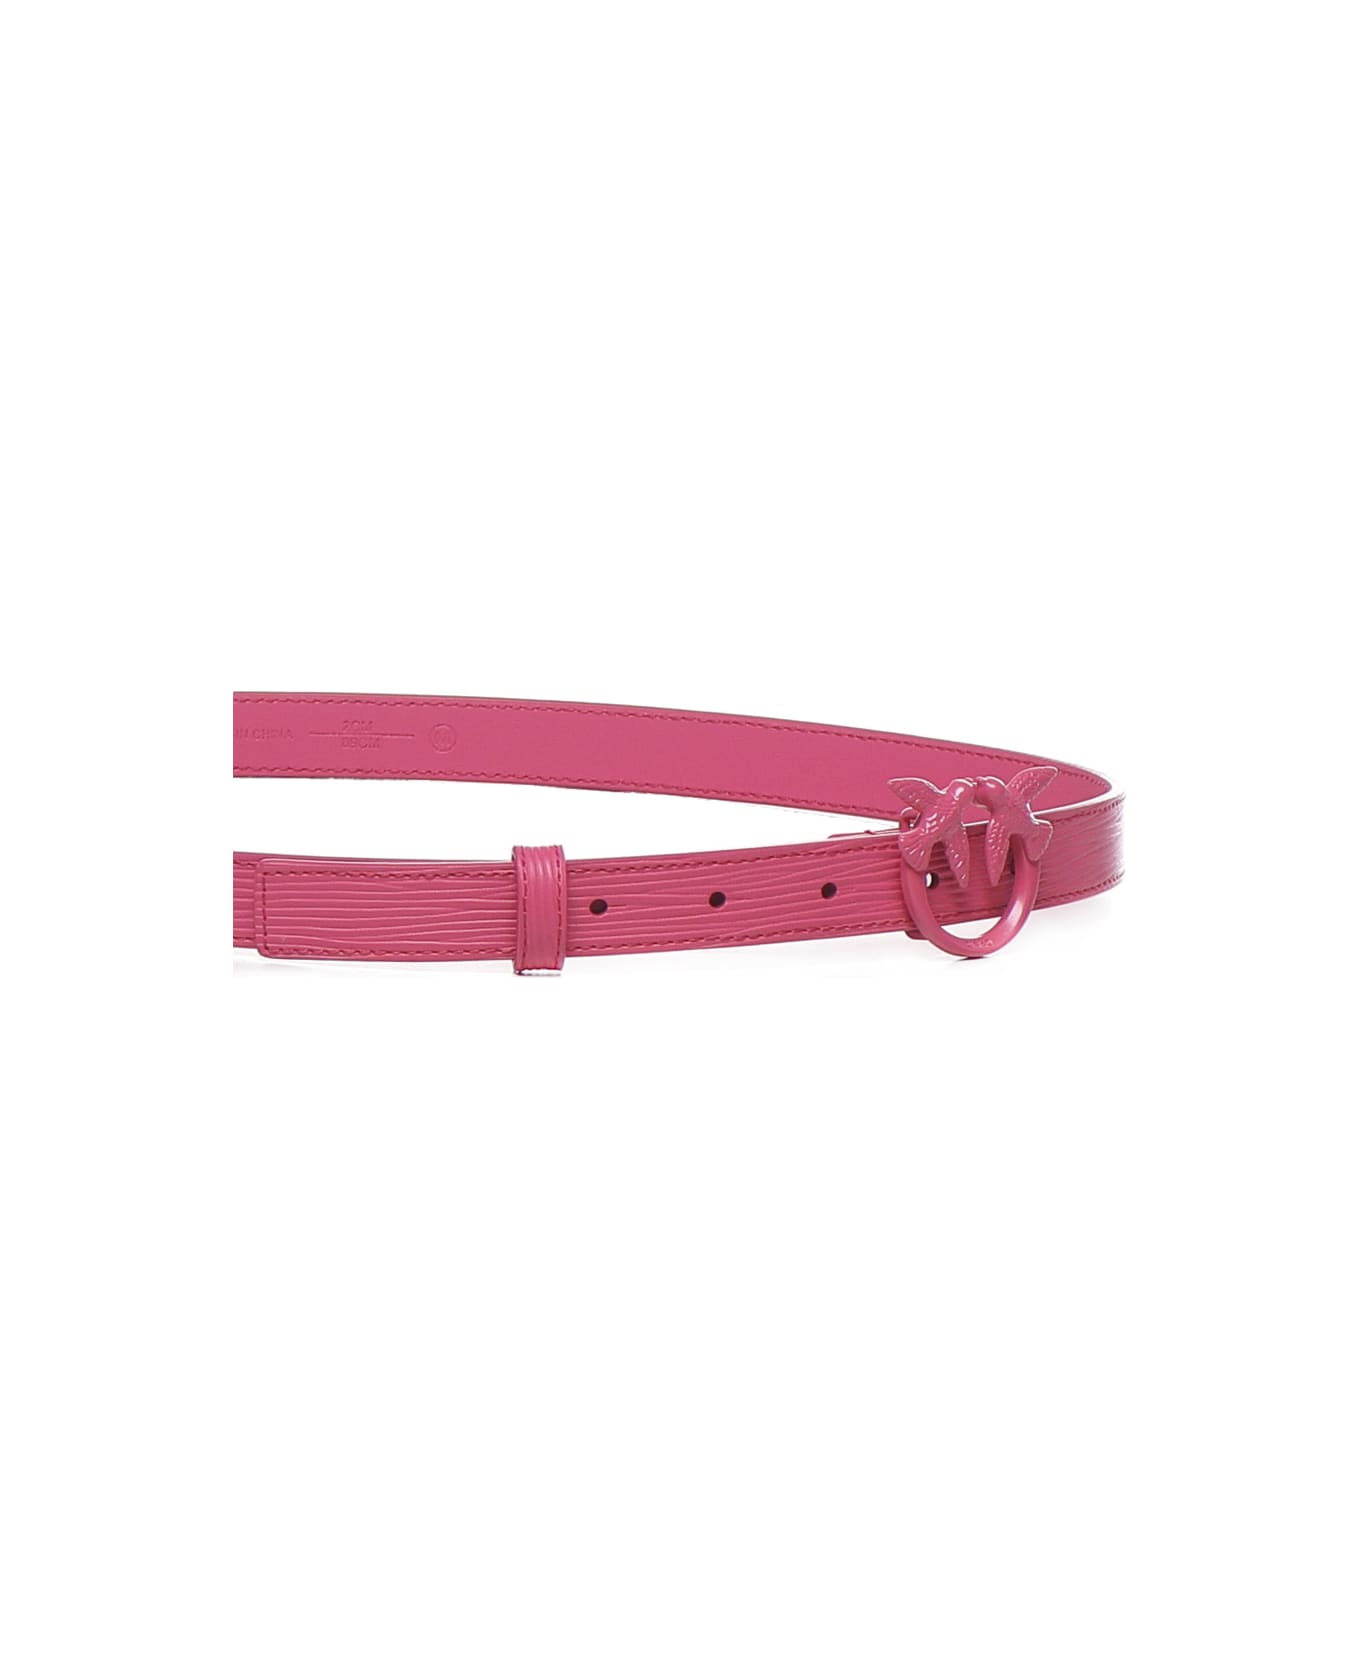 Pinko Leather Belt With Love Birds Buckle - Fucsia ベルト